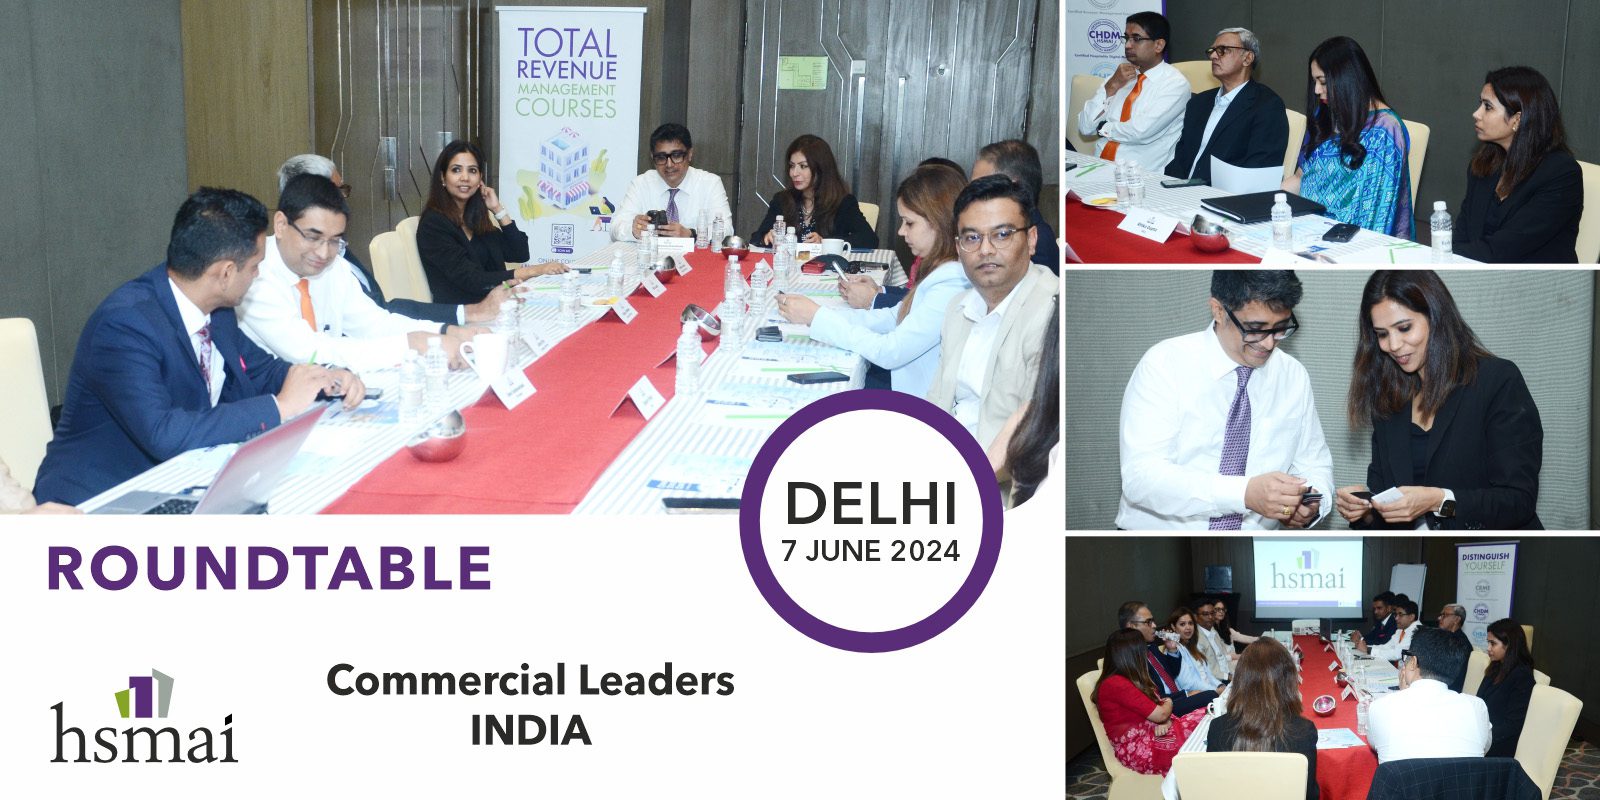 India Commercial Leaders Roundtable – Delhi